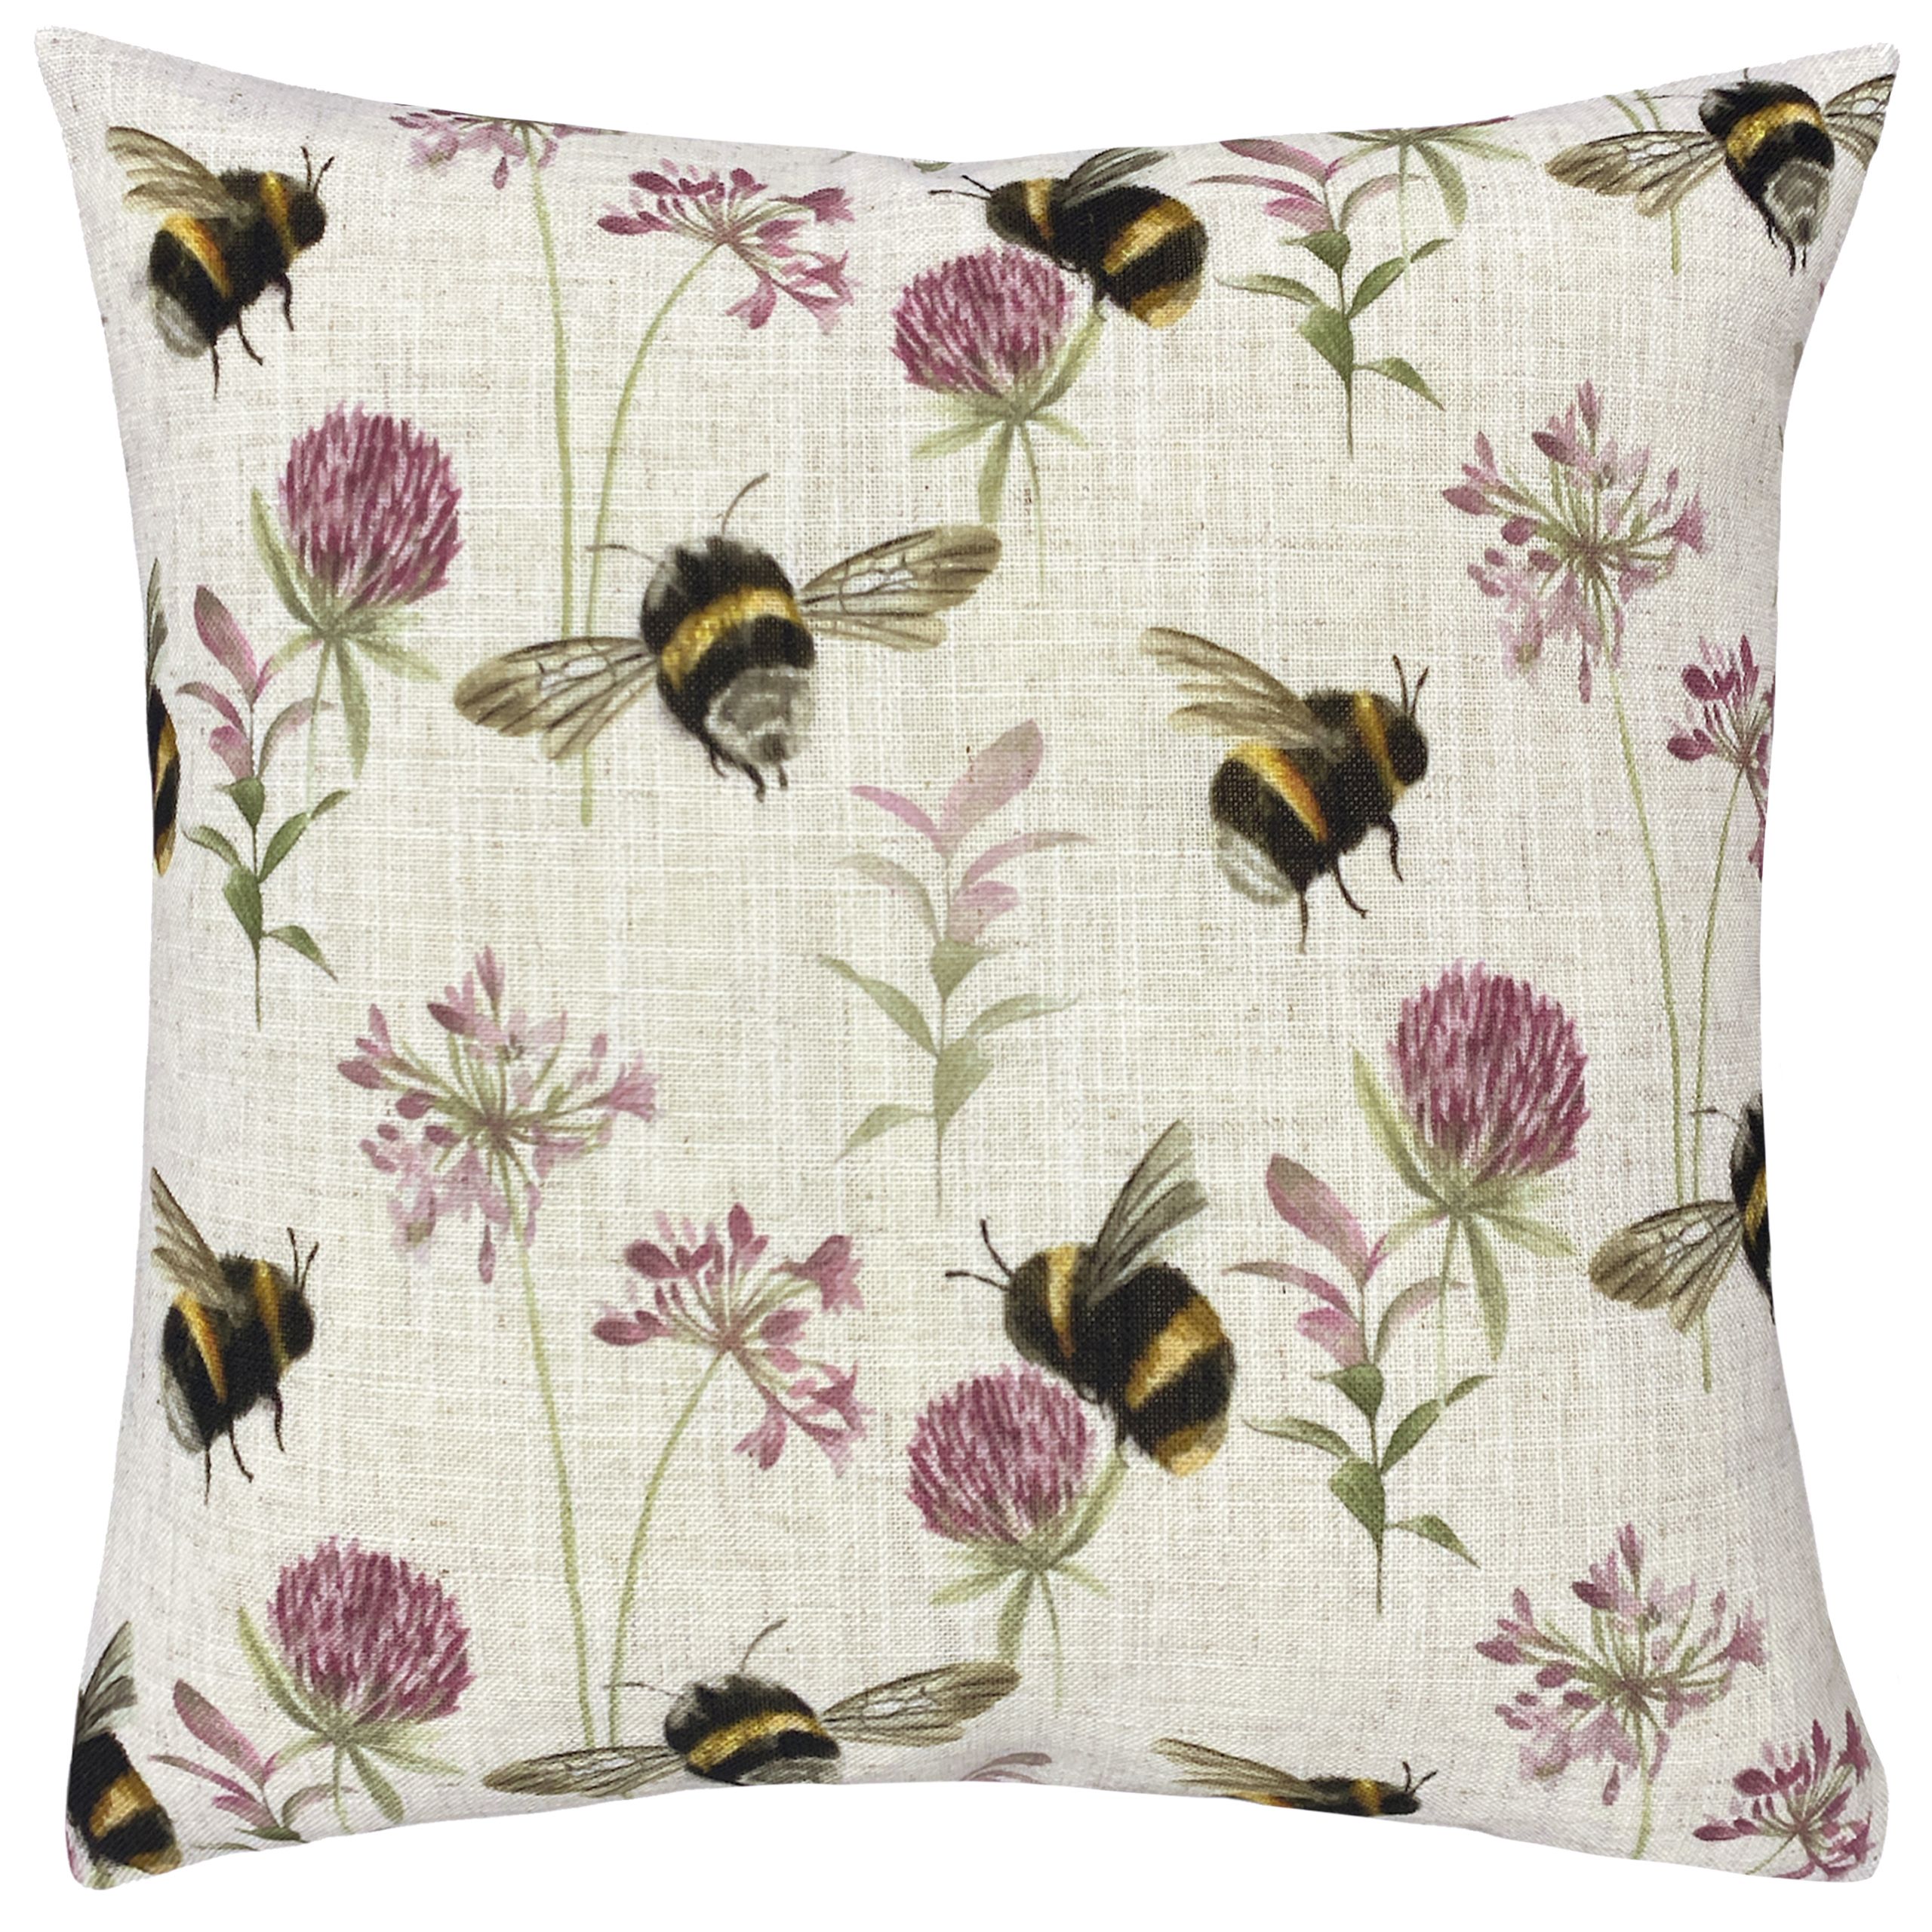 Bring a touch of the outdoors into your home with the Country Bee Garden cushion. The sweet hand-painted design, features bumble bees in flight surrounded by pretty florals. Finished on a linen-look fabric, a lovely addition to any home.